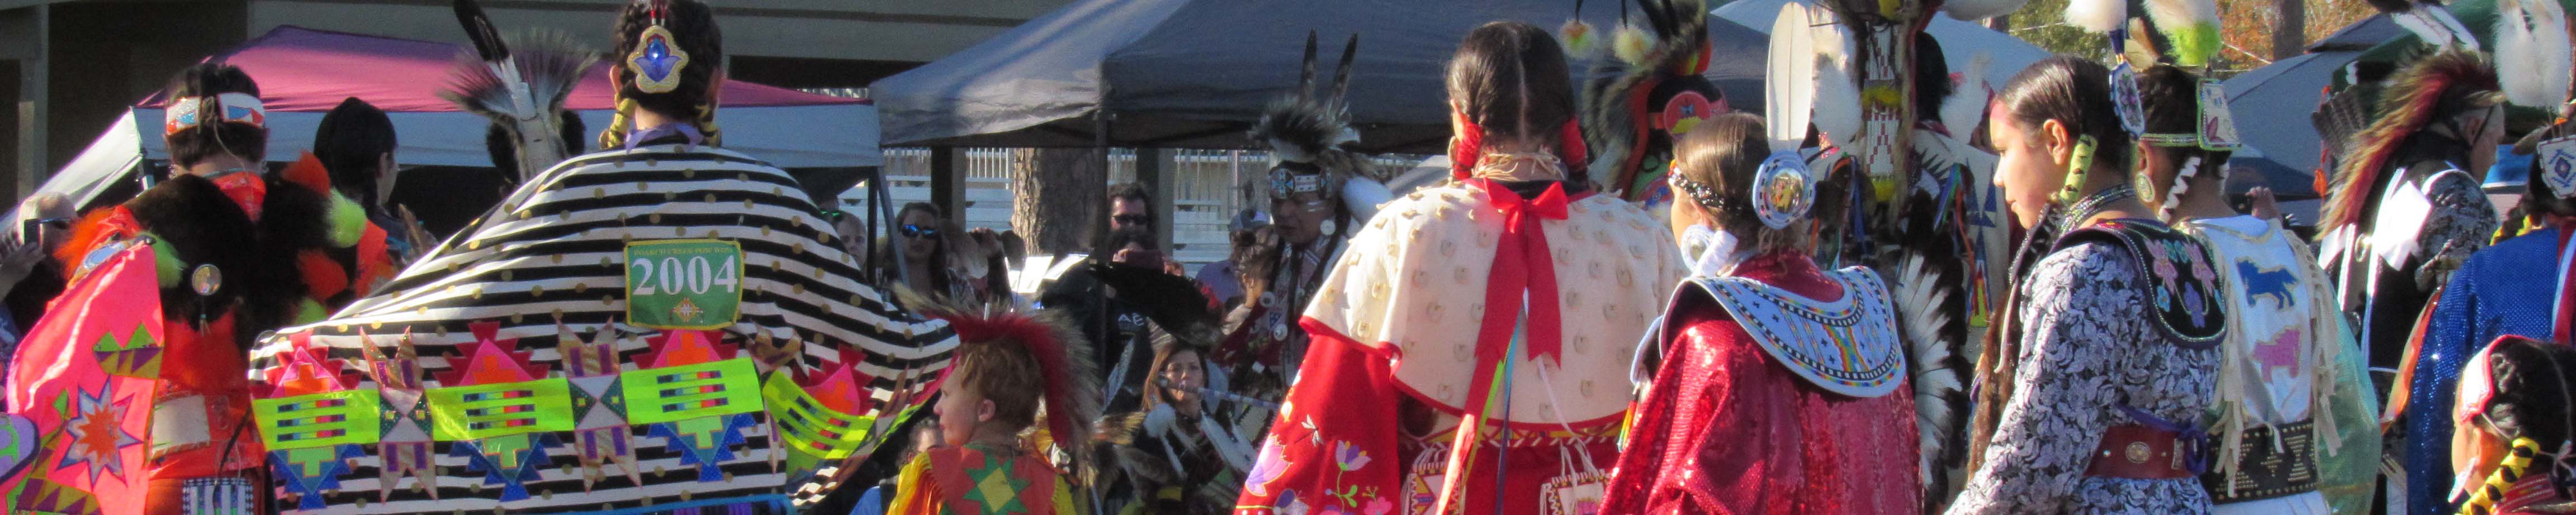 People in regalia performing a dance at a powwow